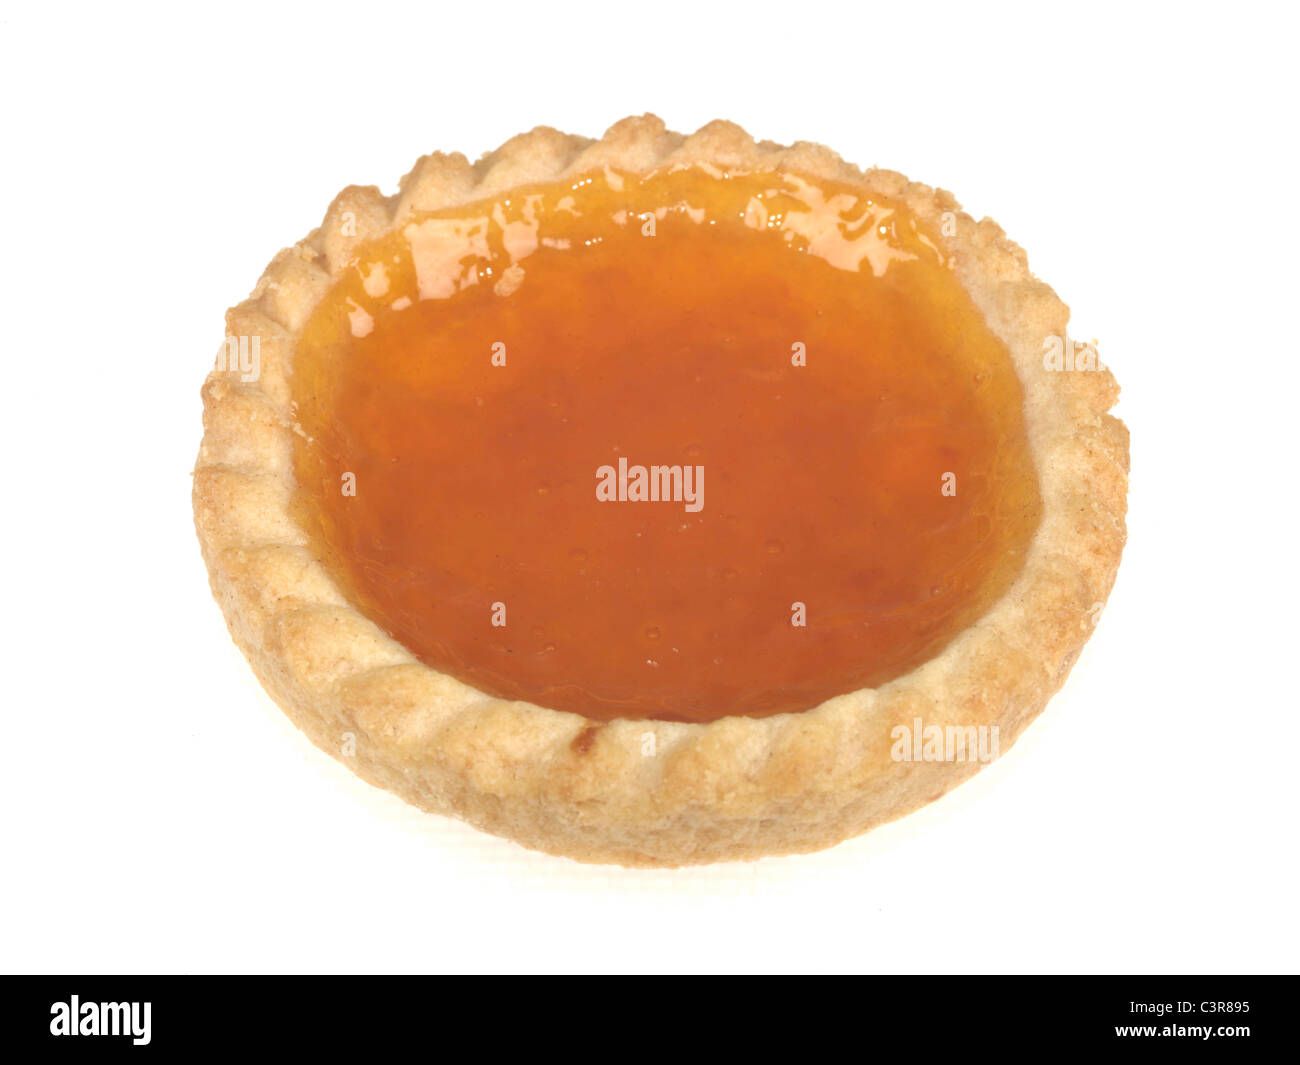 Fresh Individual Traditional Sweet Jam Tarts Isolated Against A White Background With A CLipping Path And No People Stock Photo